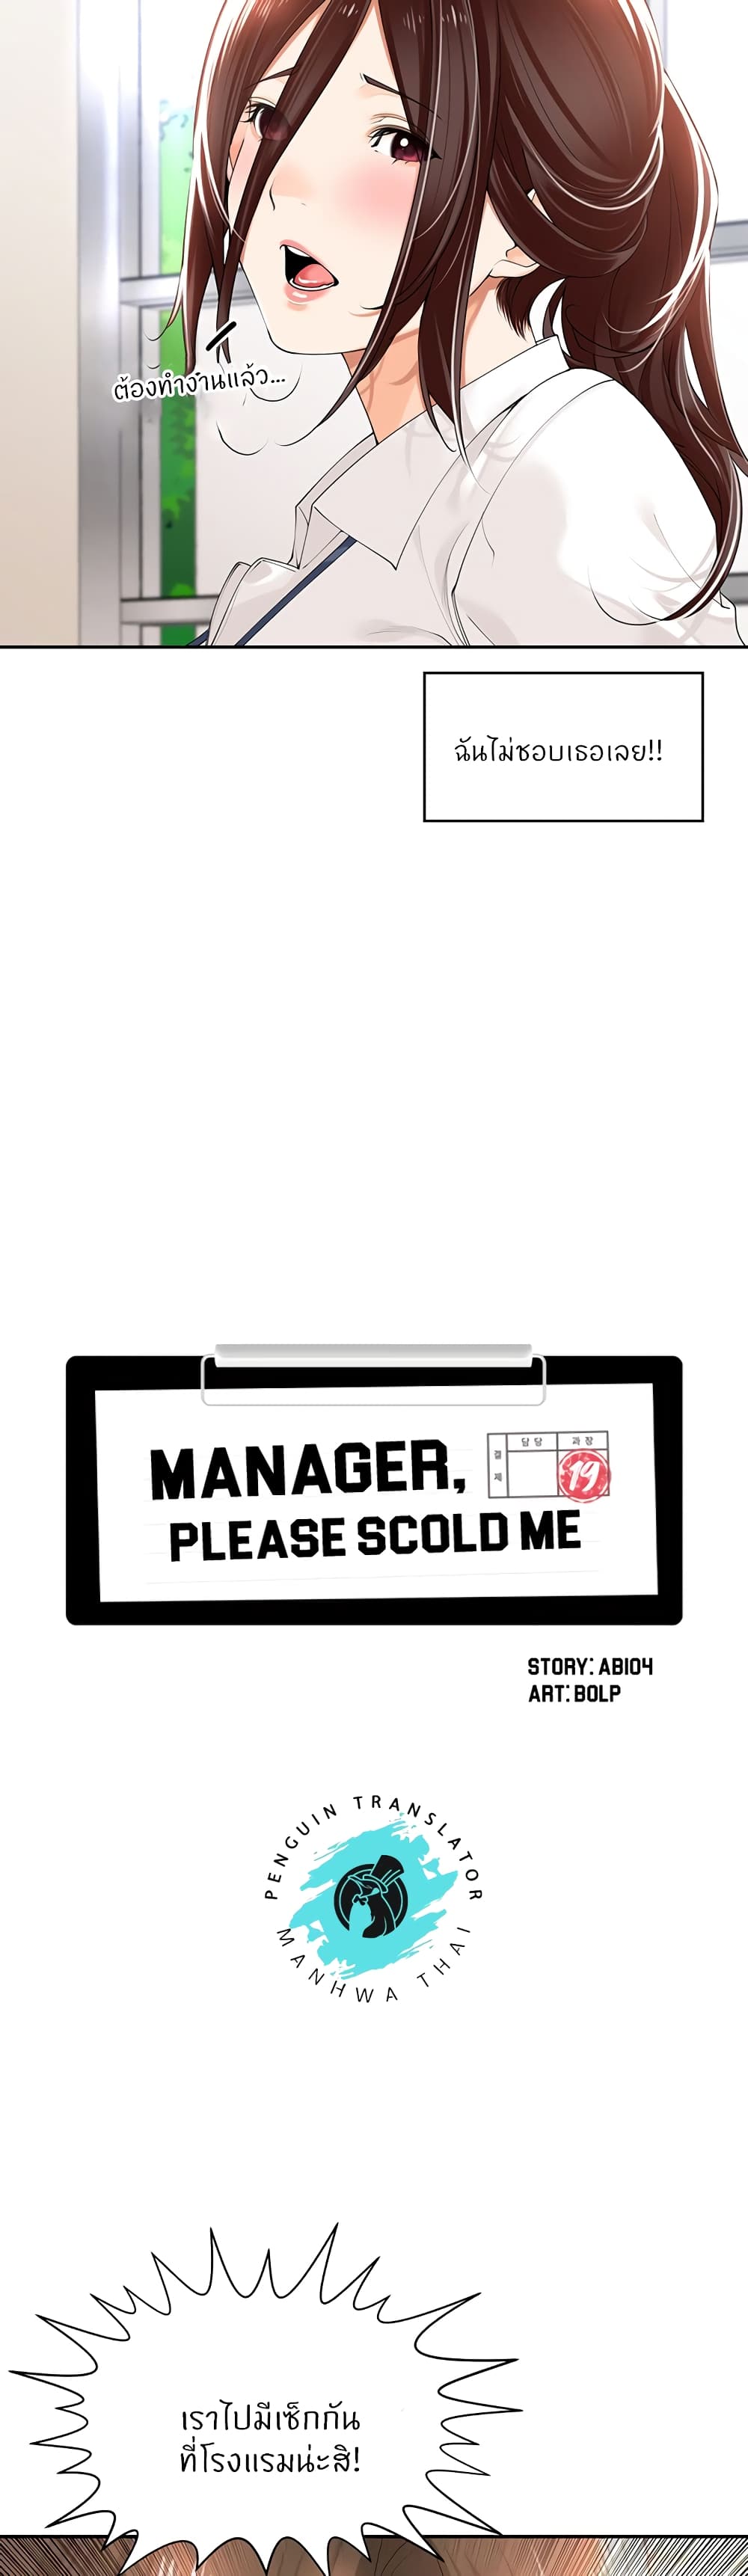 Manager, Please Scold Me 17-17